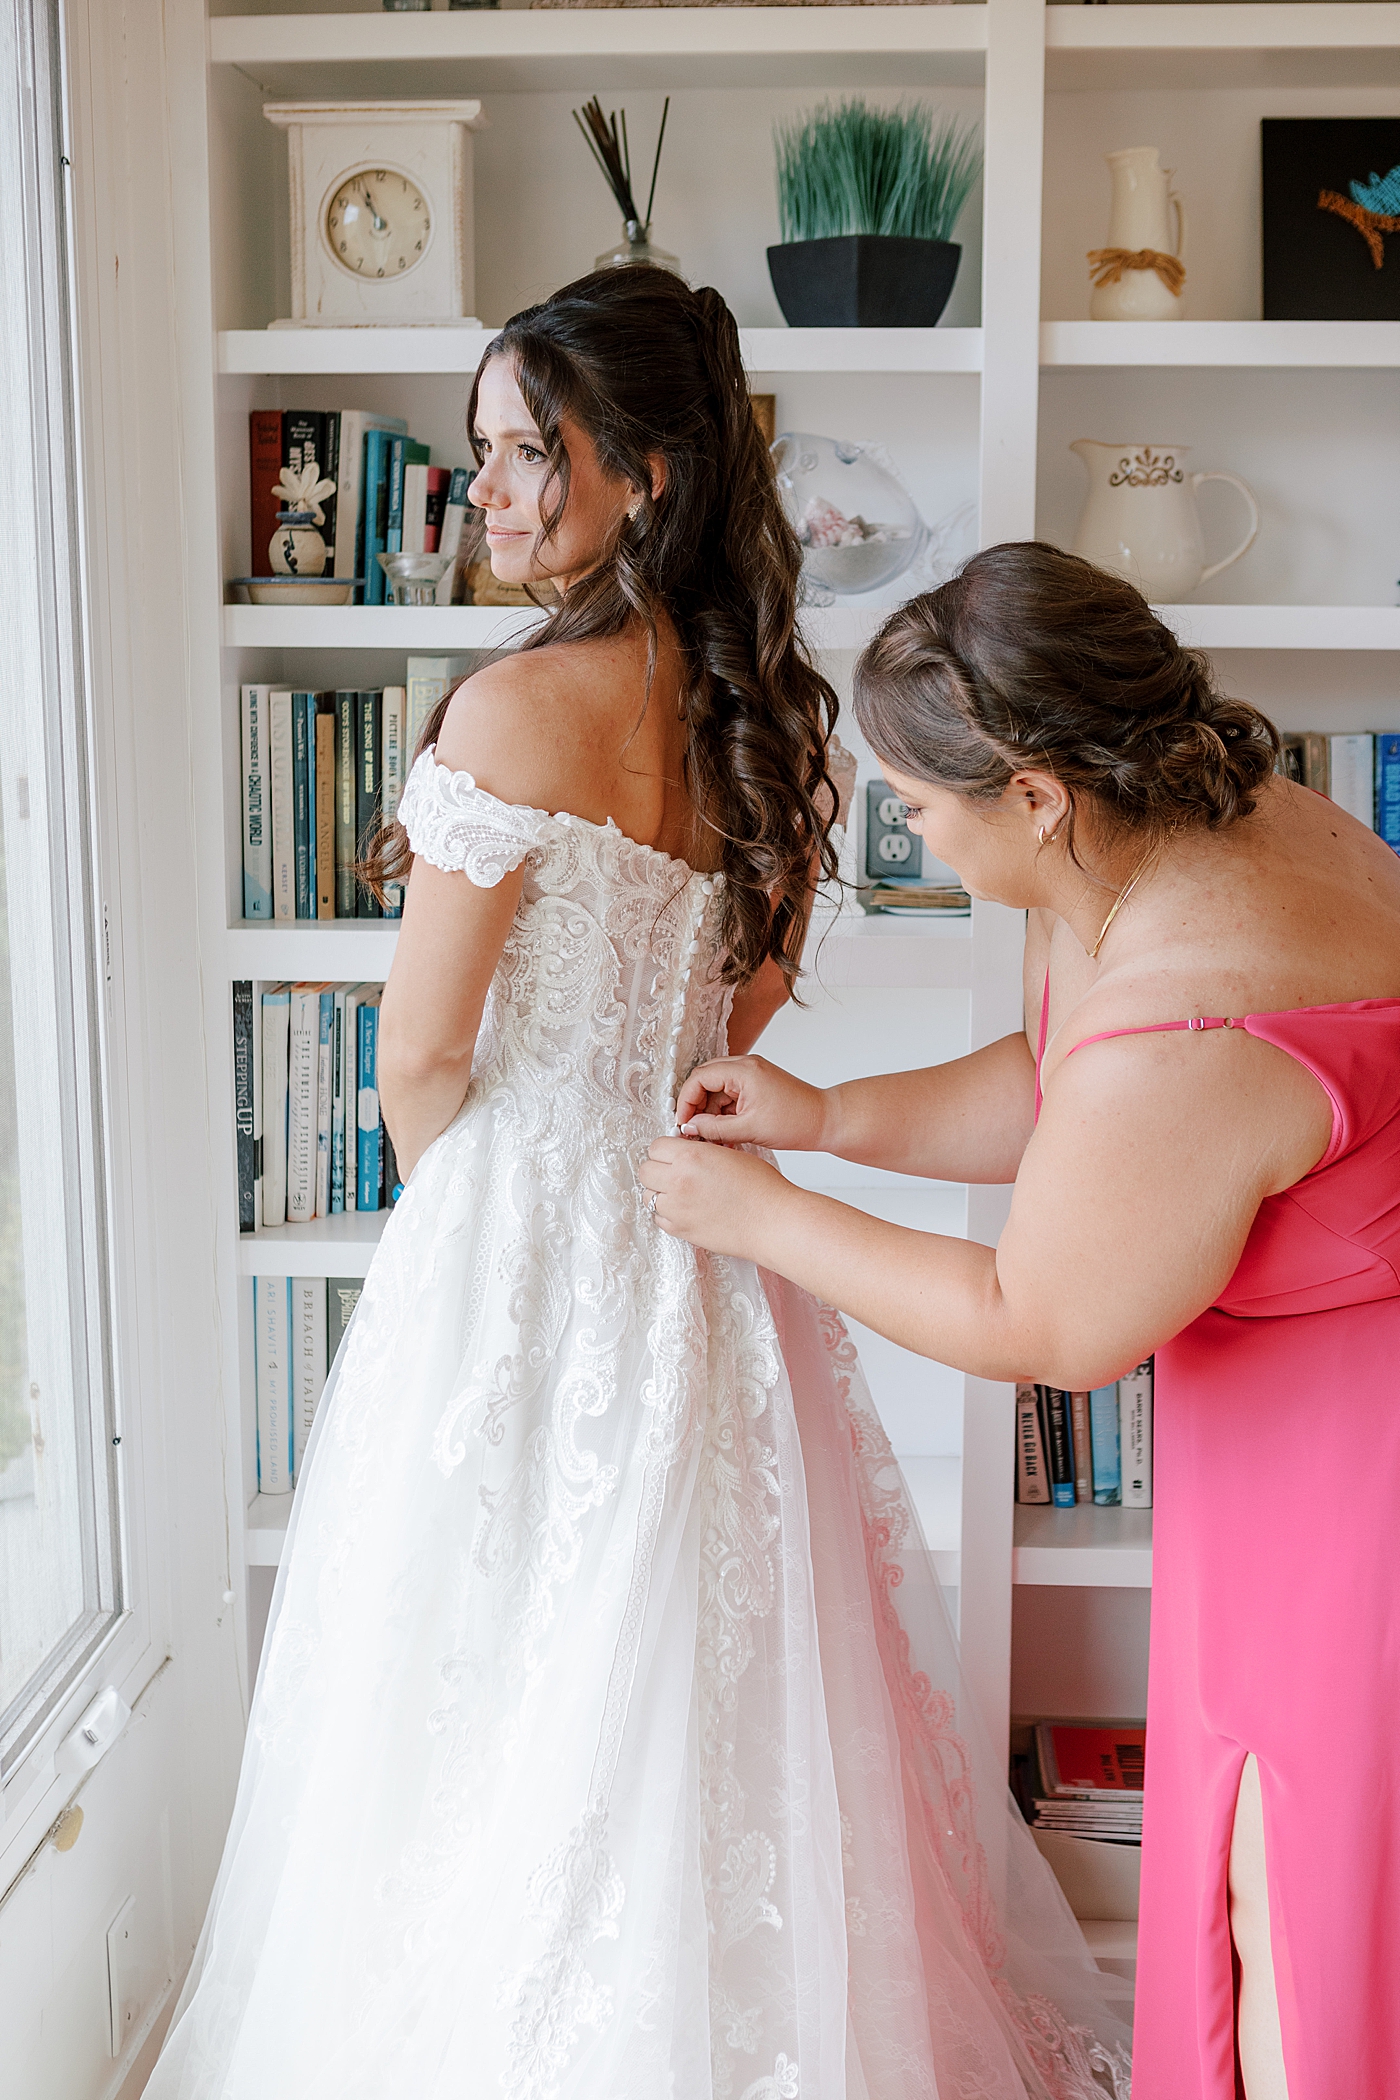 Bridesmaid in a pink dress buttoning the bride in her wedding dress in front of a bookshelf | Image by Hope Helmuth Photography